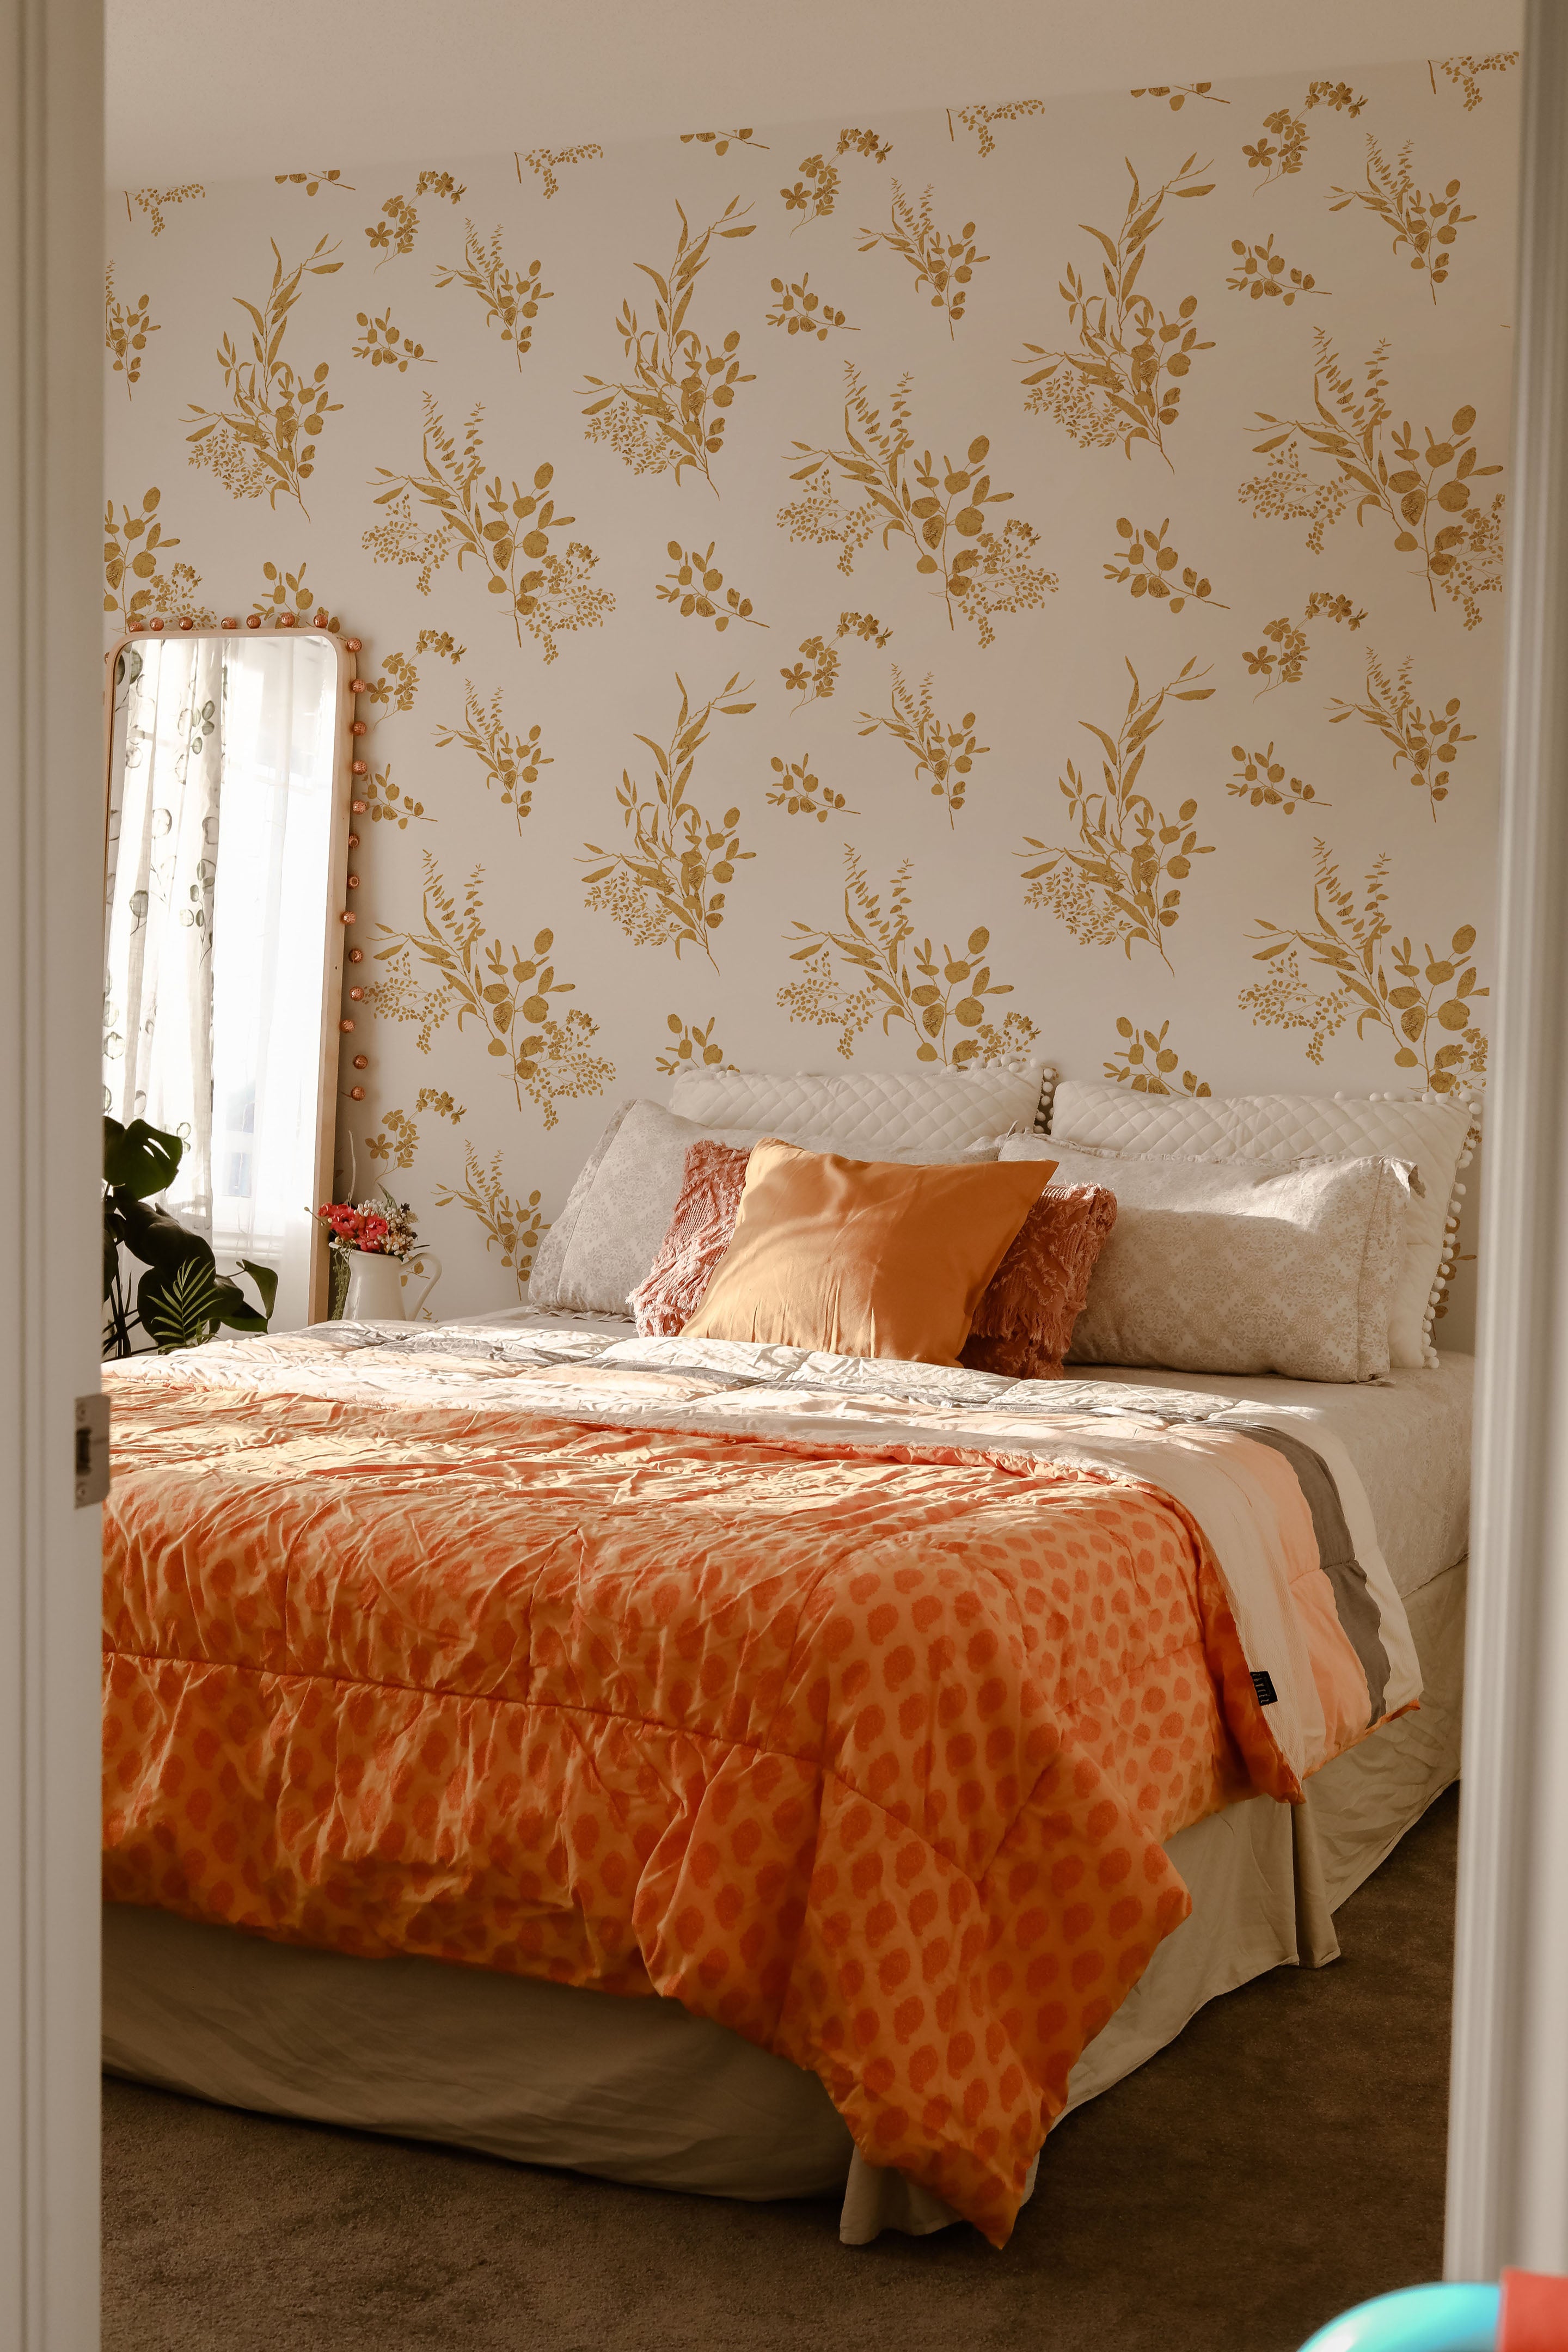 A serene bedroom showcasing the Golden Greenery Wallpaper, which adds a touch of nature-inspired elegance. The room includes a bed covered in a vibrant orange and beige patterned duvet, complemented by decorative pillows and a view into a sunlit window with sheer curtains.